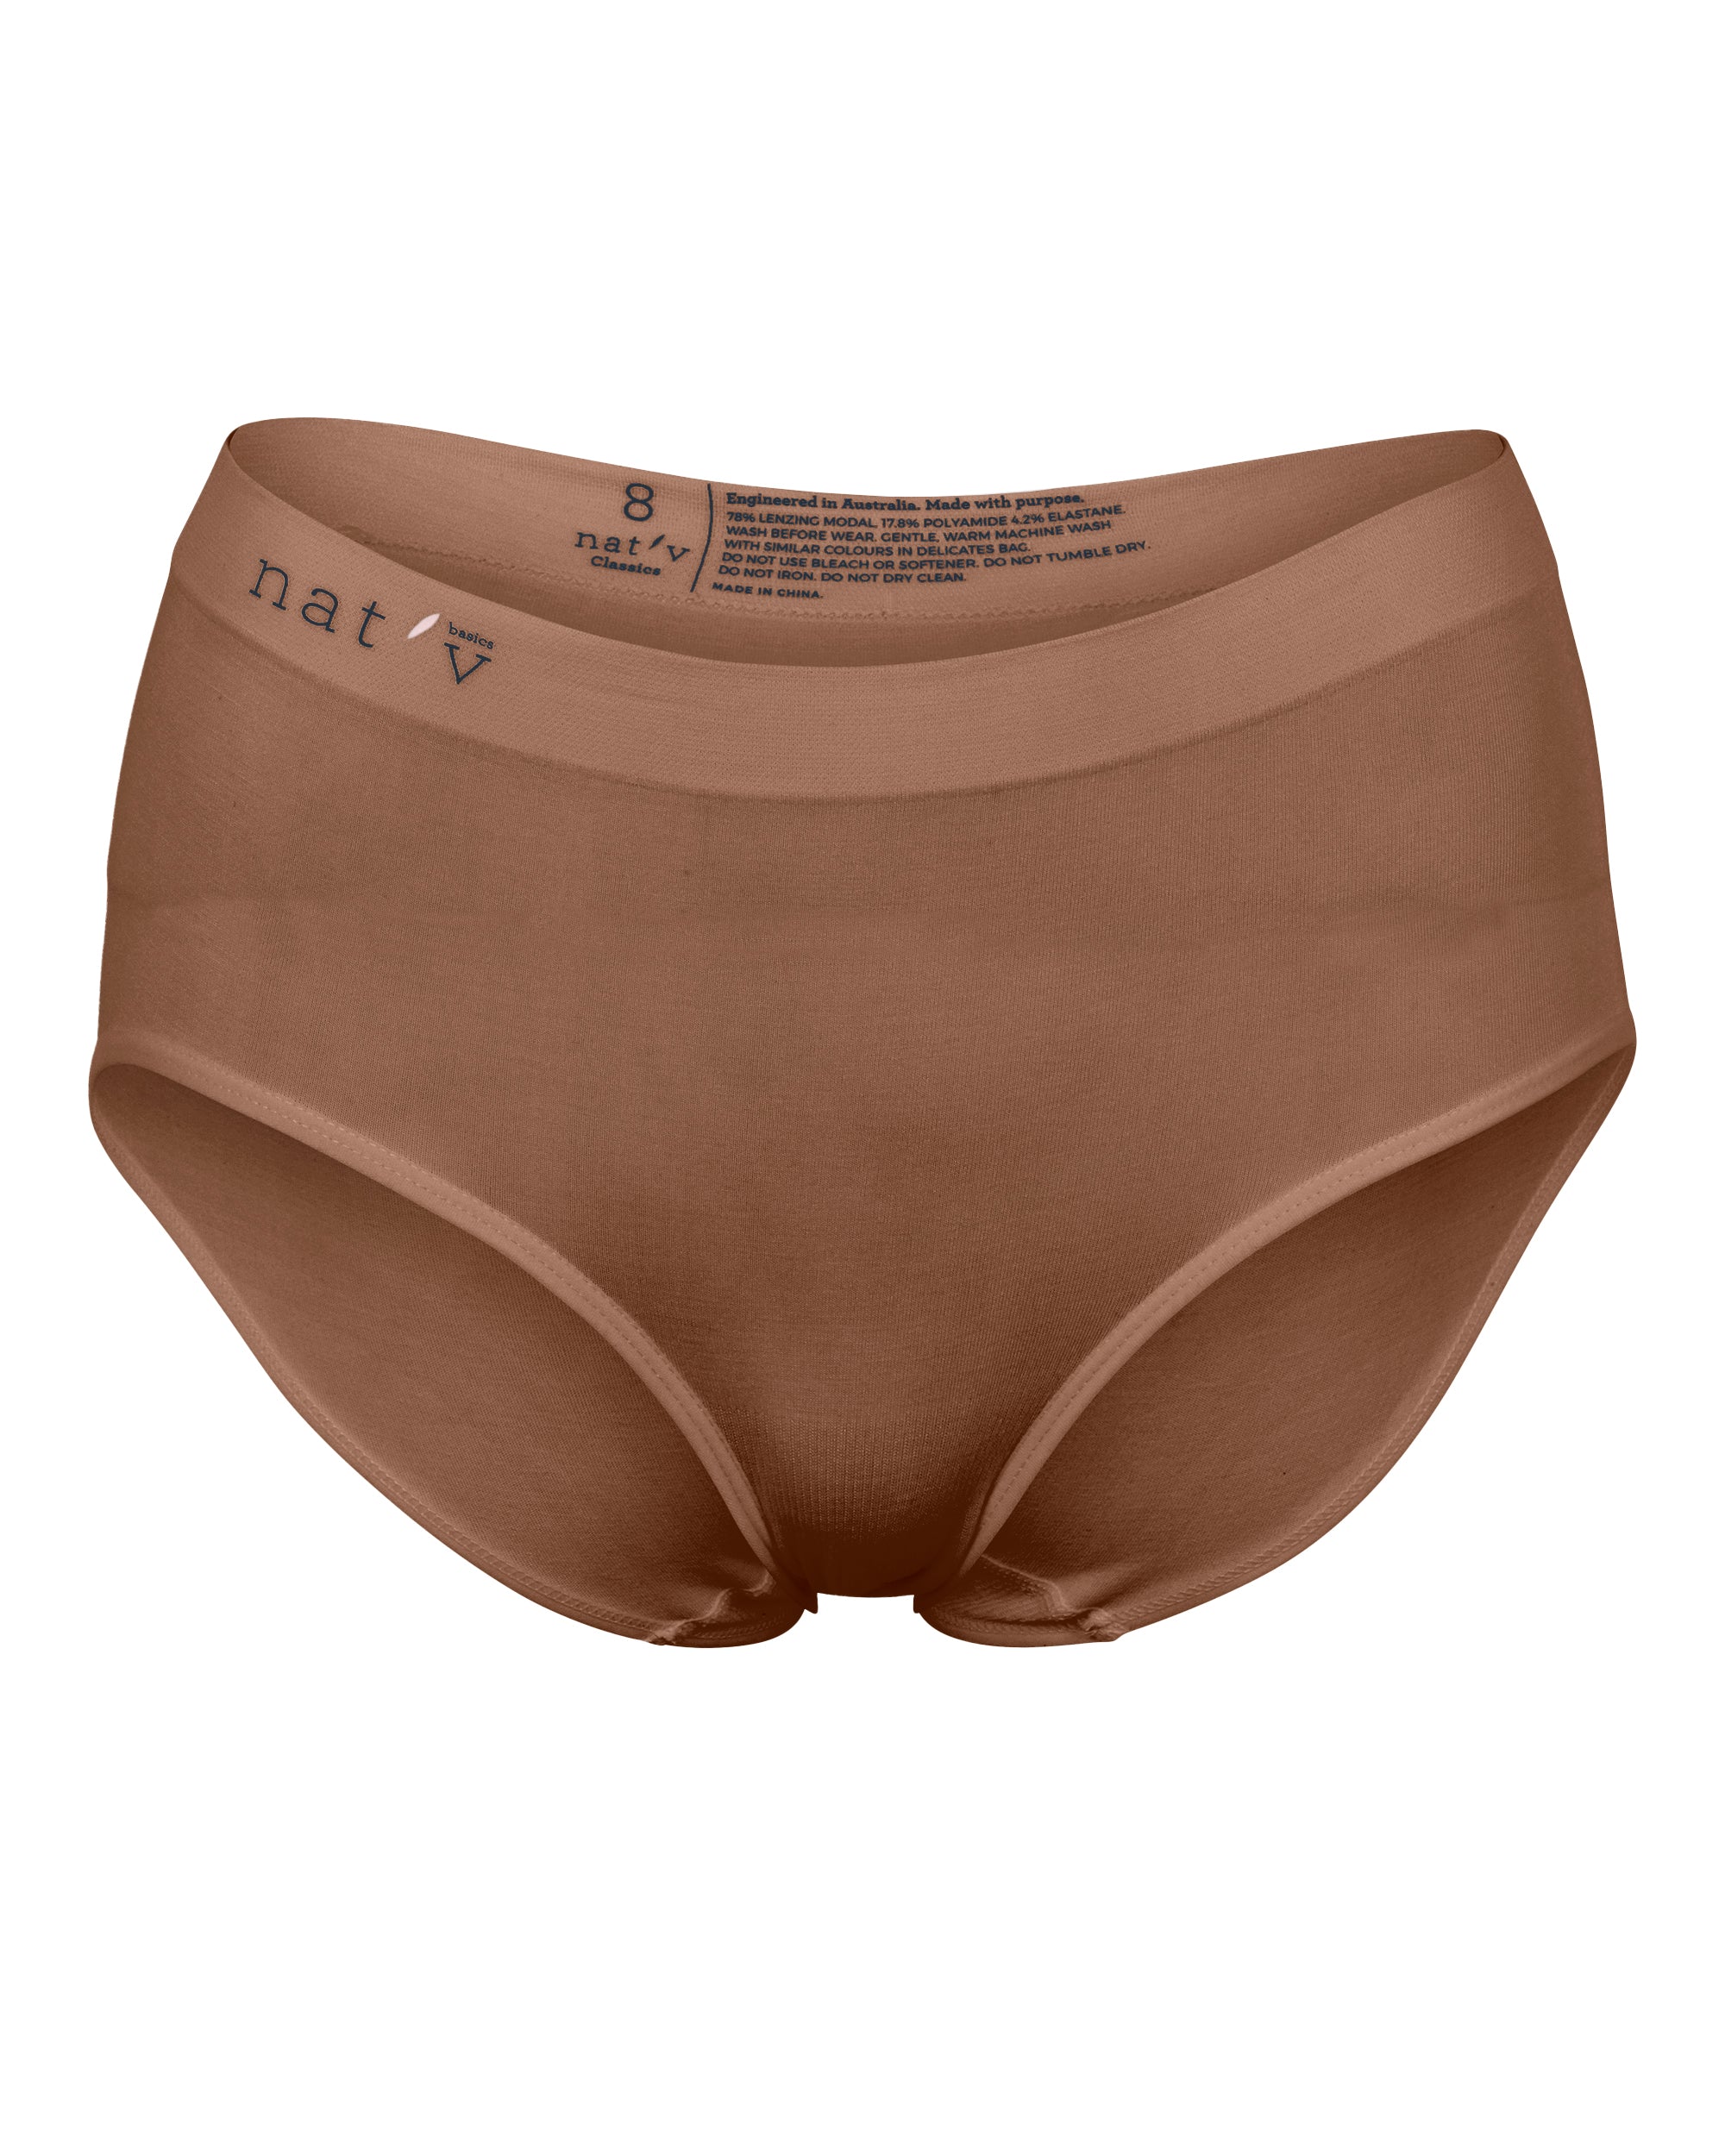 Classic underwear made from sustainable materials and timeless design.